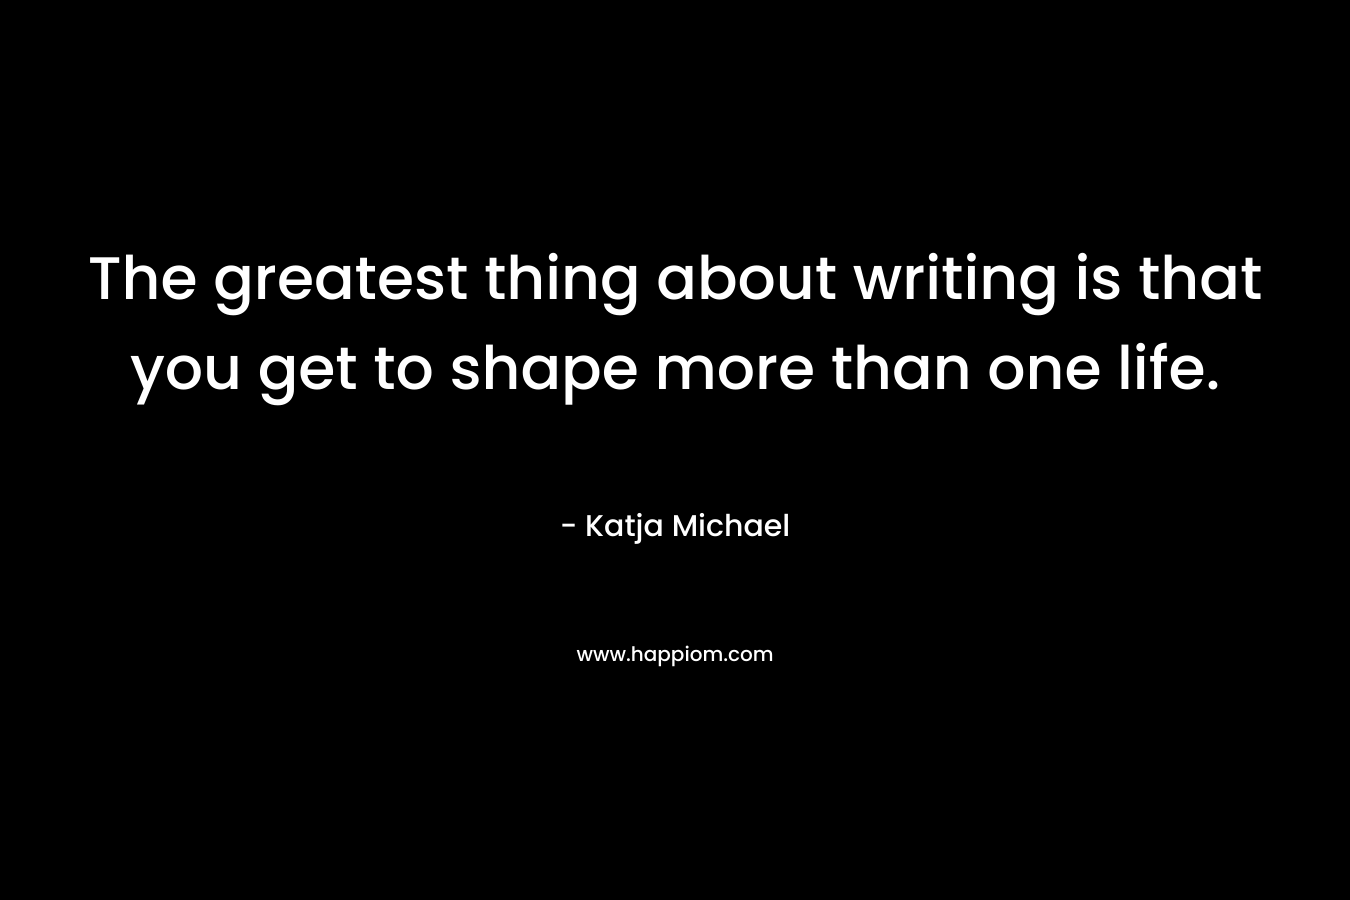 The greatest thing about writing is that you get to shape more than one life. – Katja Michael